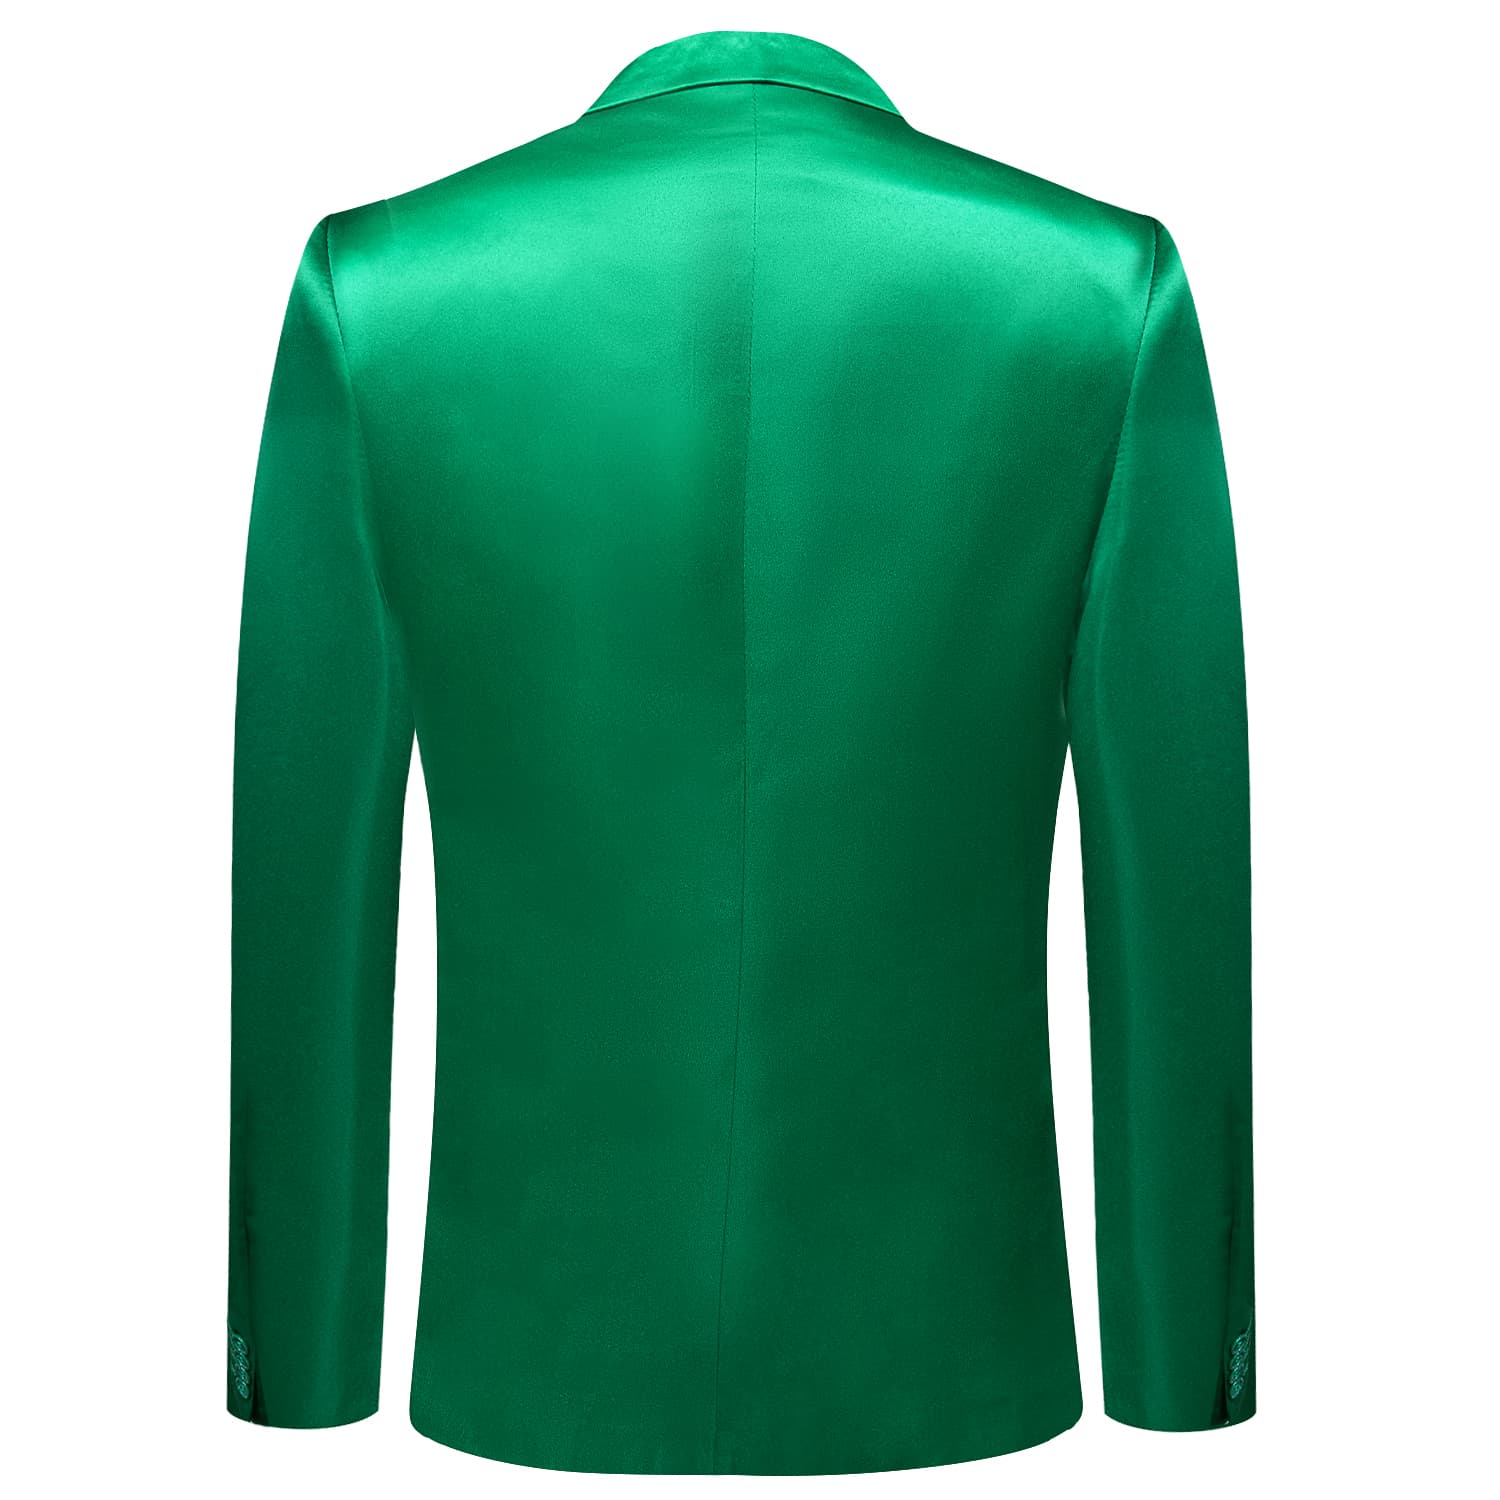  Blazer Forest Green Party Solid Top Men Suit